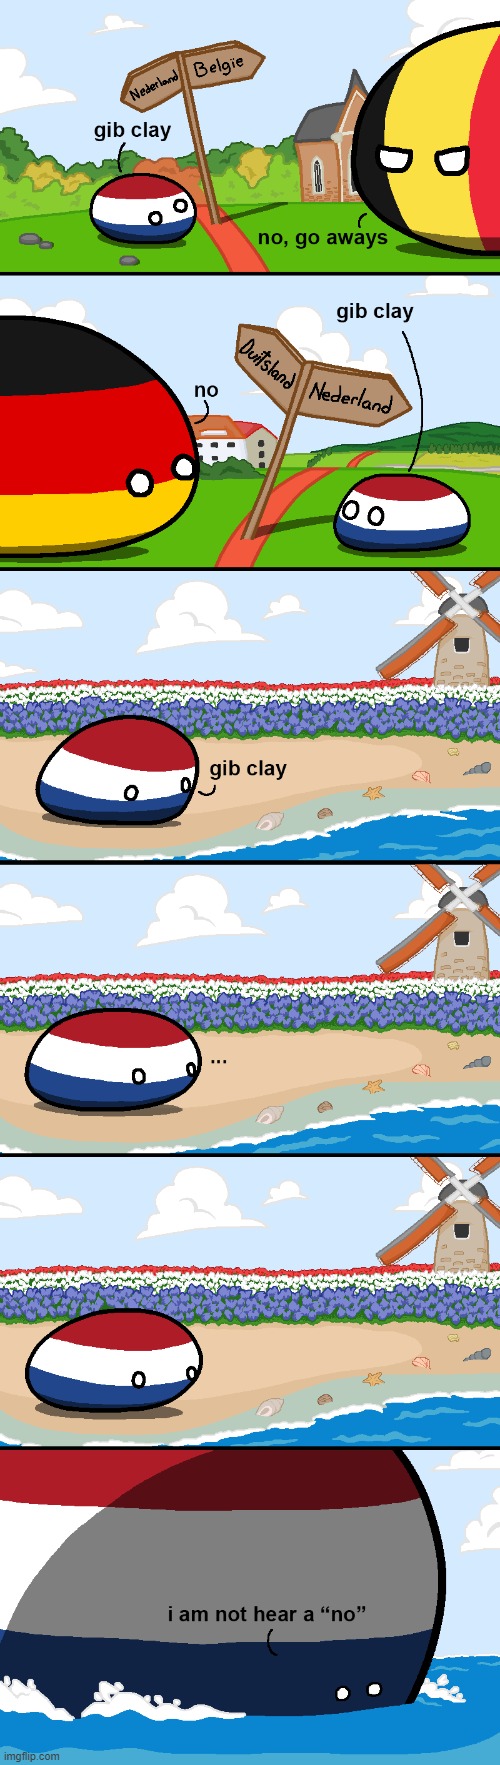 At least he will maybe find some clay in the bottom of the ocean. | image tagged in polandball,netherlands,clay | made w/ Imgflip meme maker